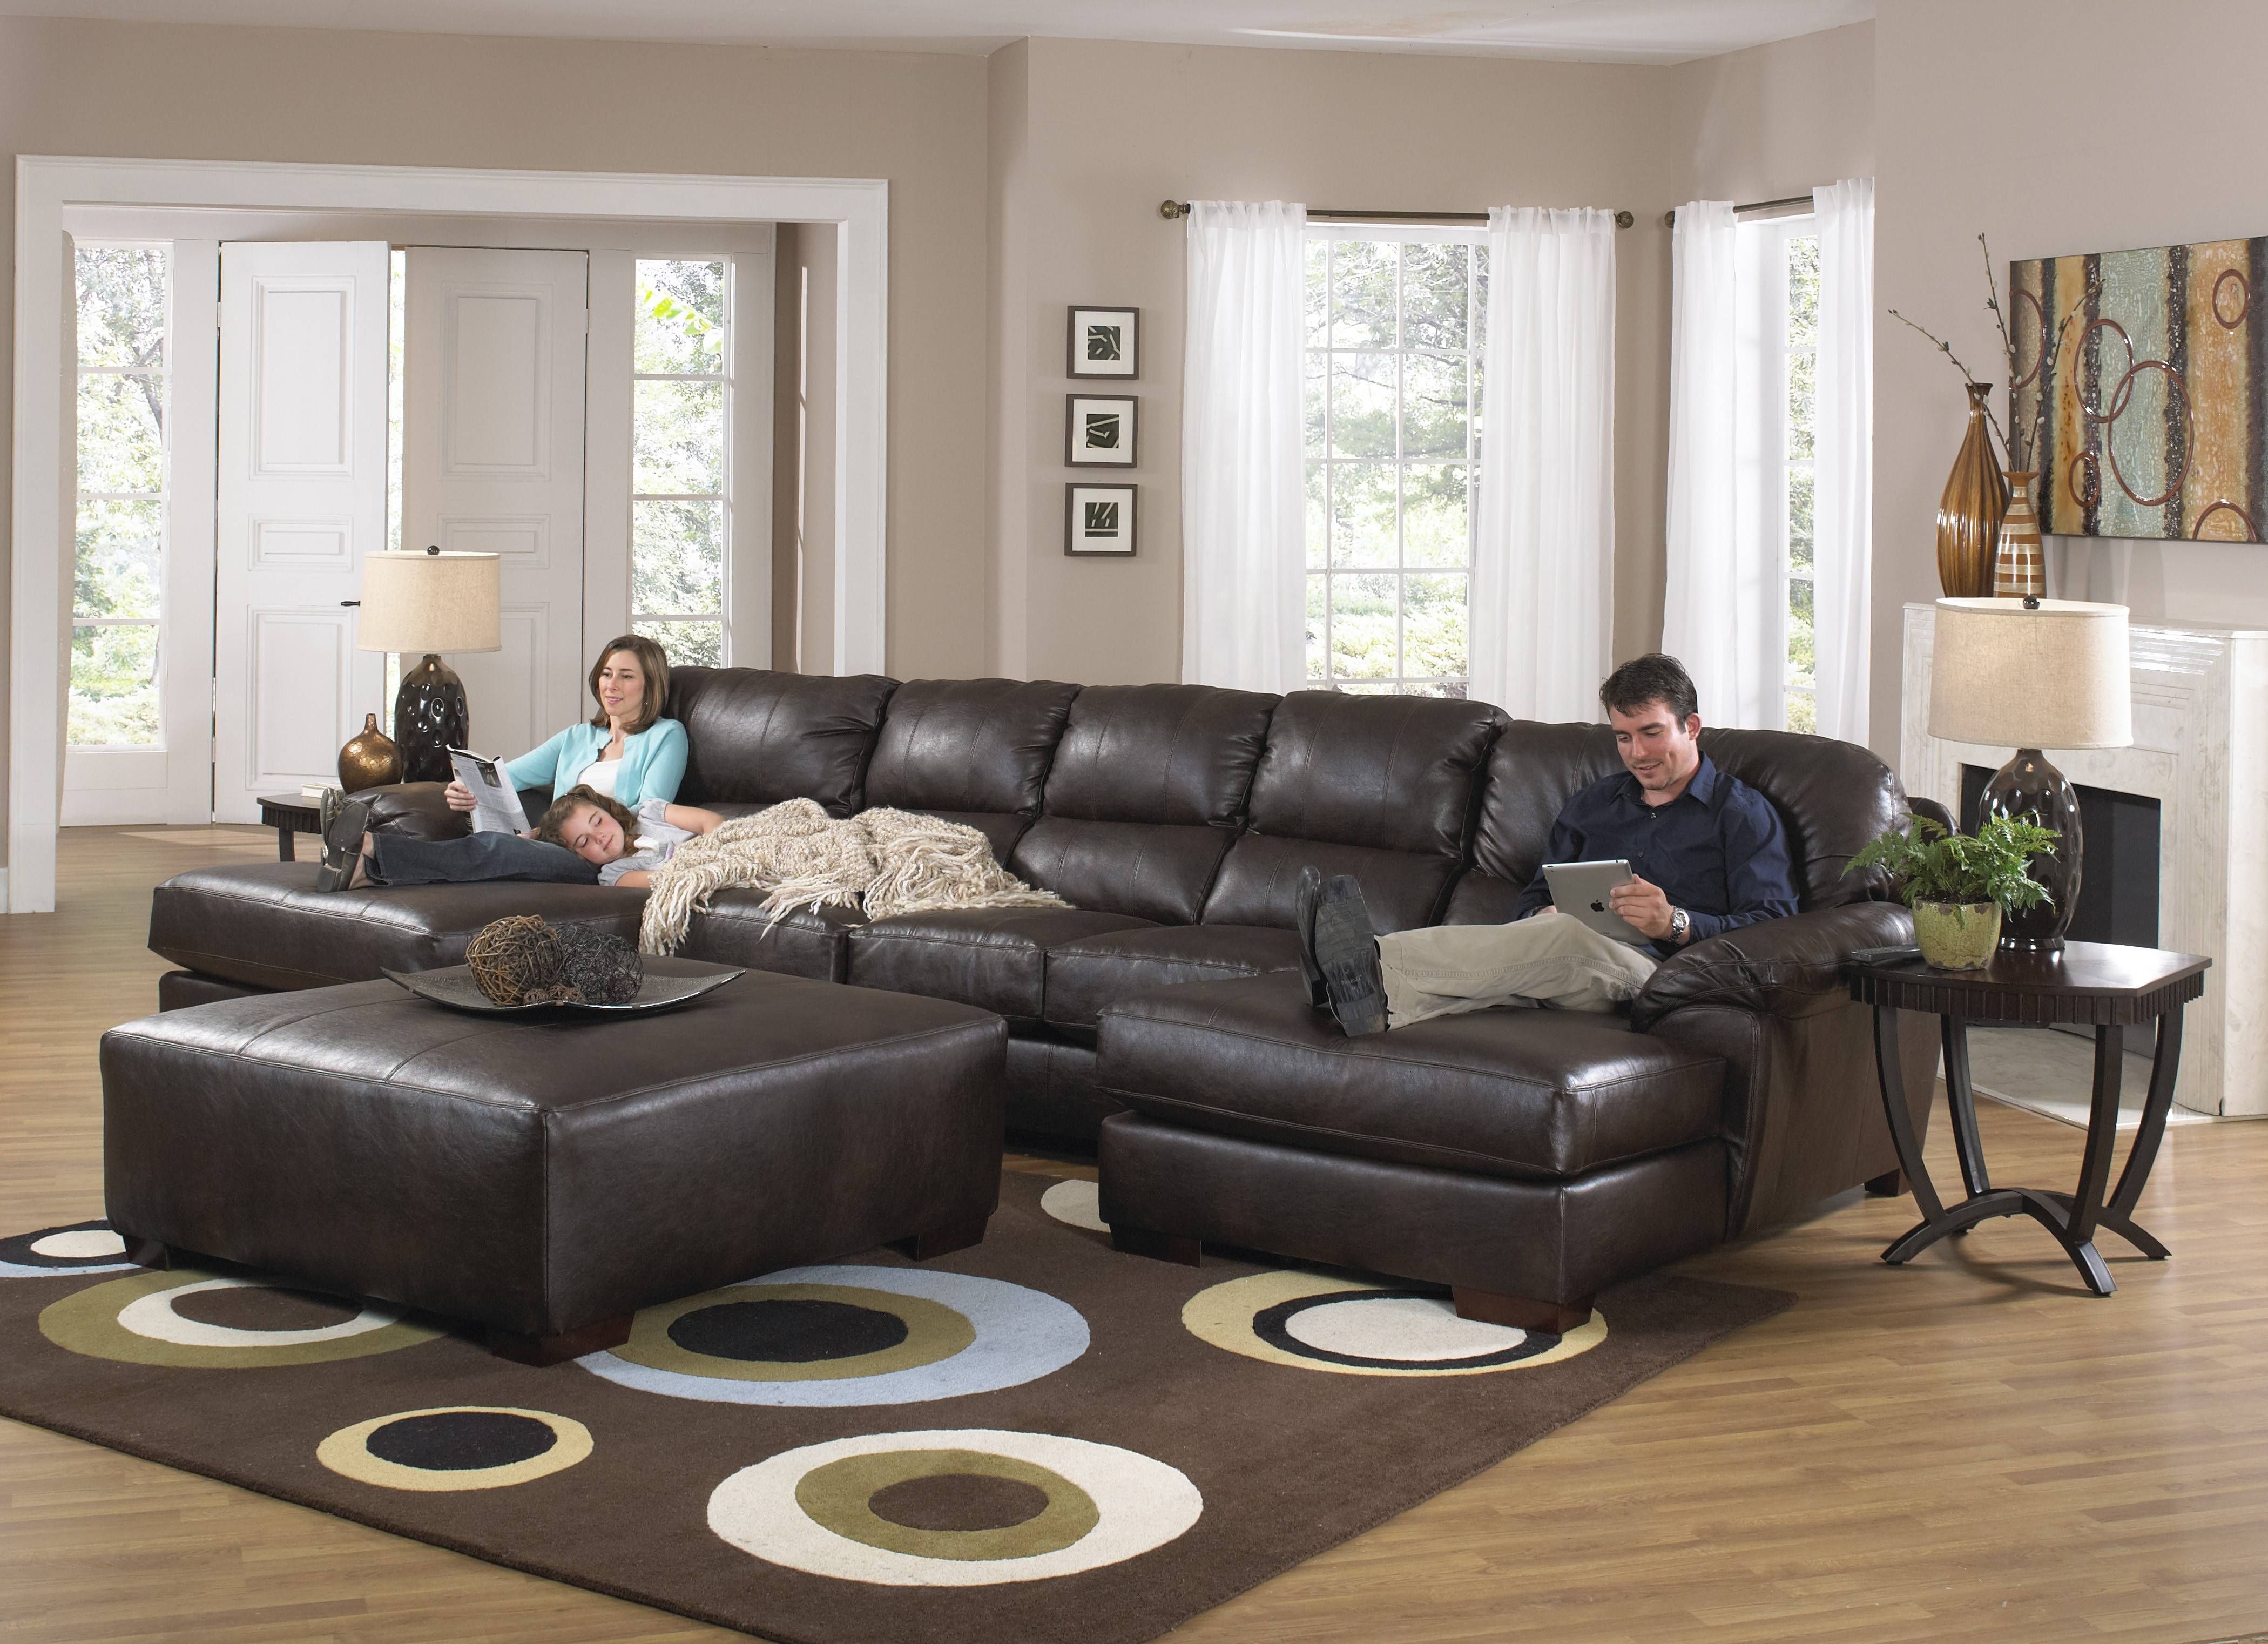 Living Room : Large Leather U Shaped Sectional Couch With Chaise With High End Leather Sectional Sofa (View 19 of 25)